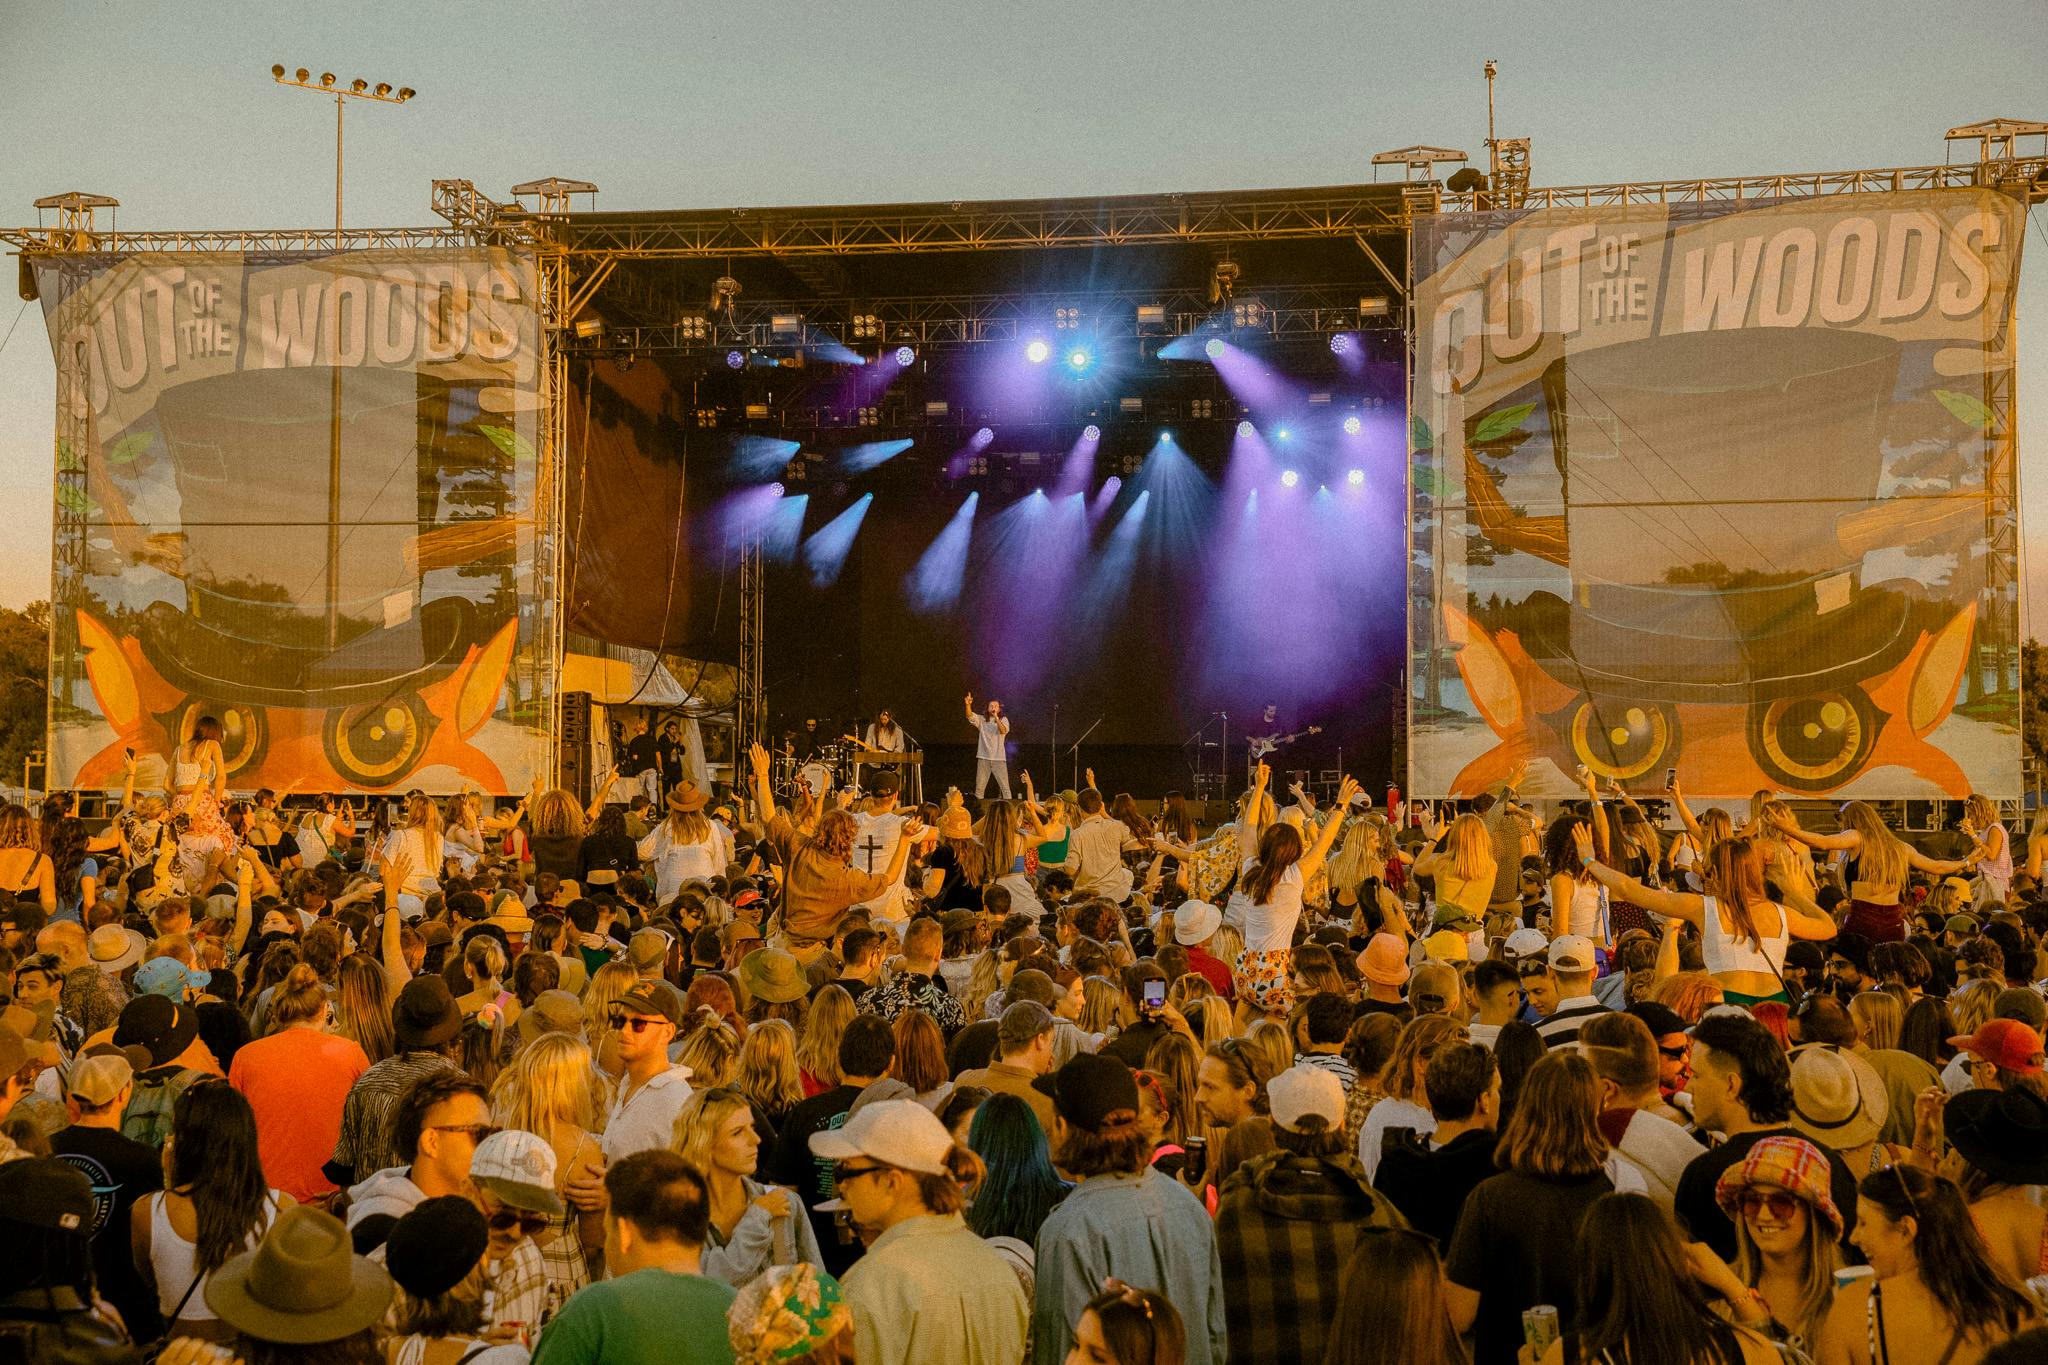 Perth Western Australia summer music festivals Out of the Woods